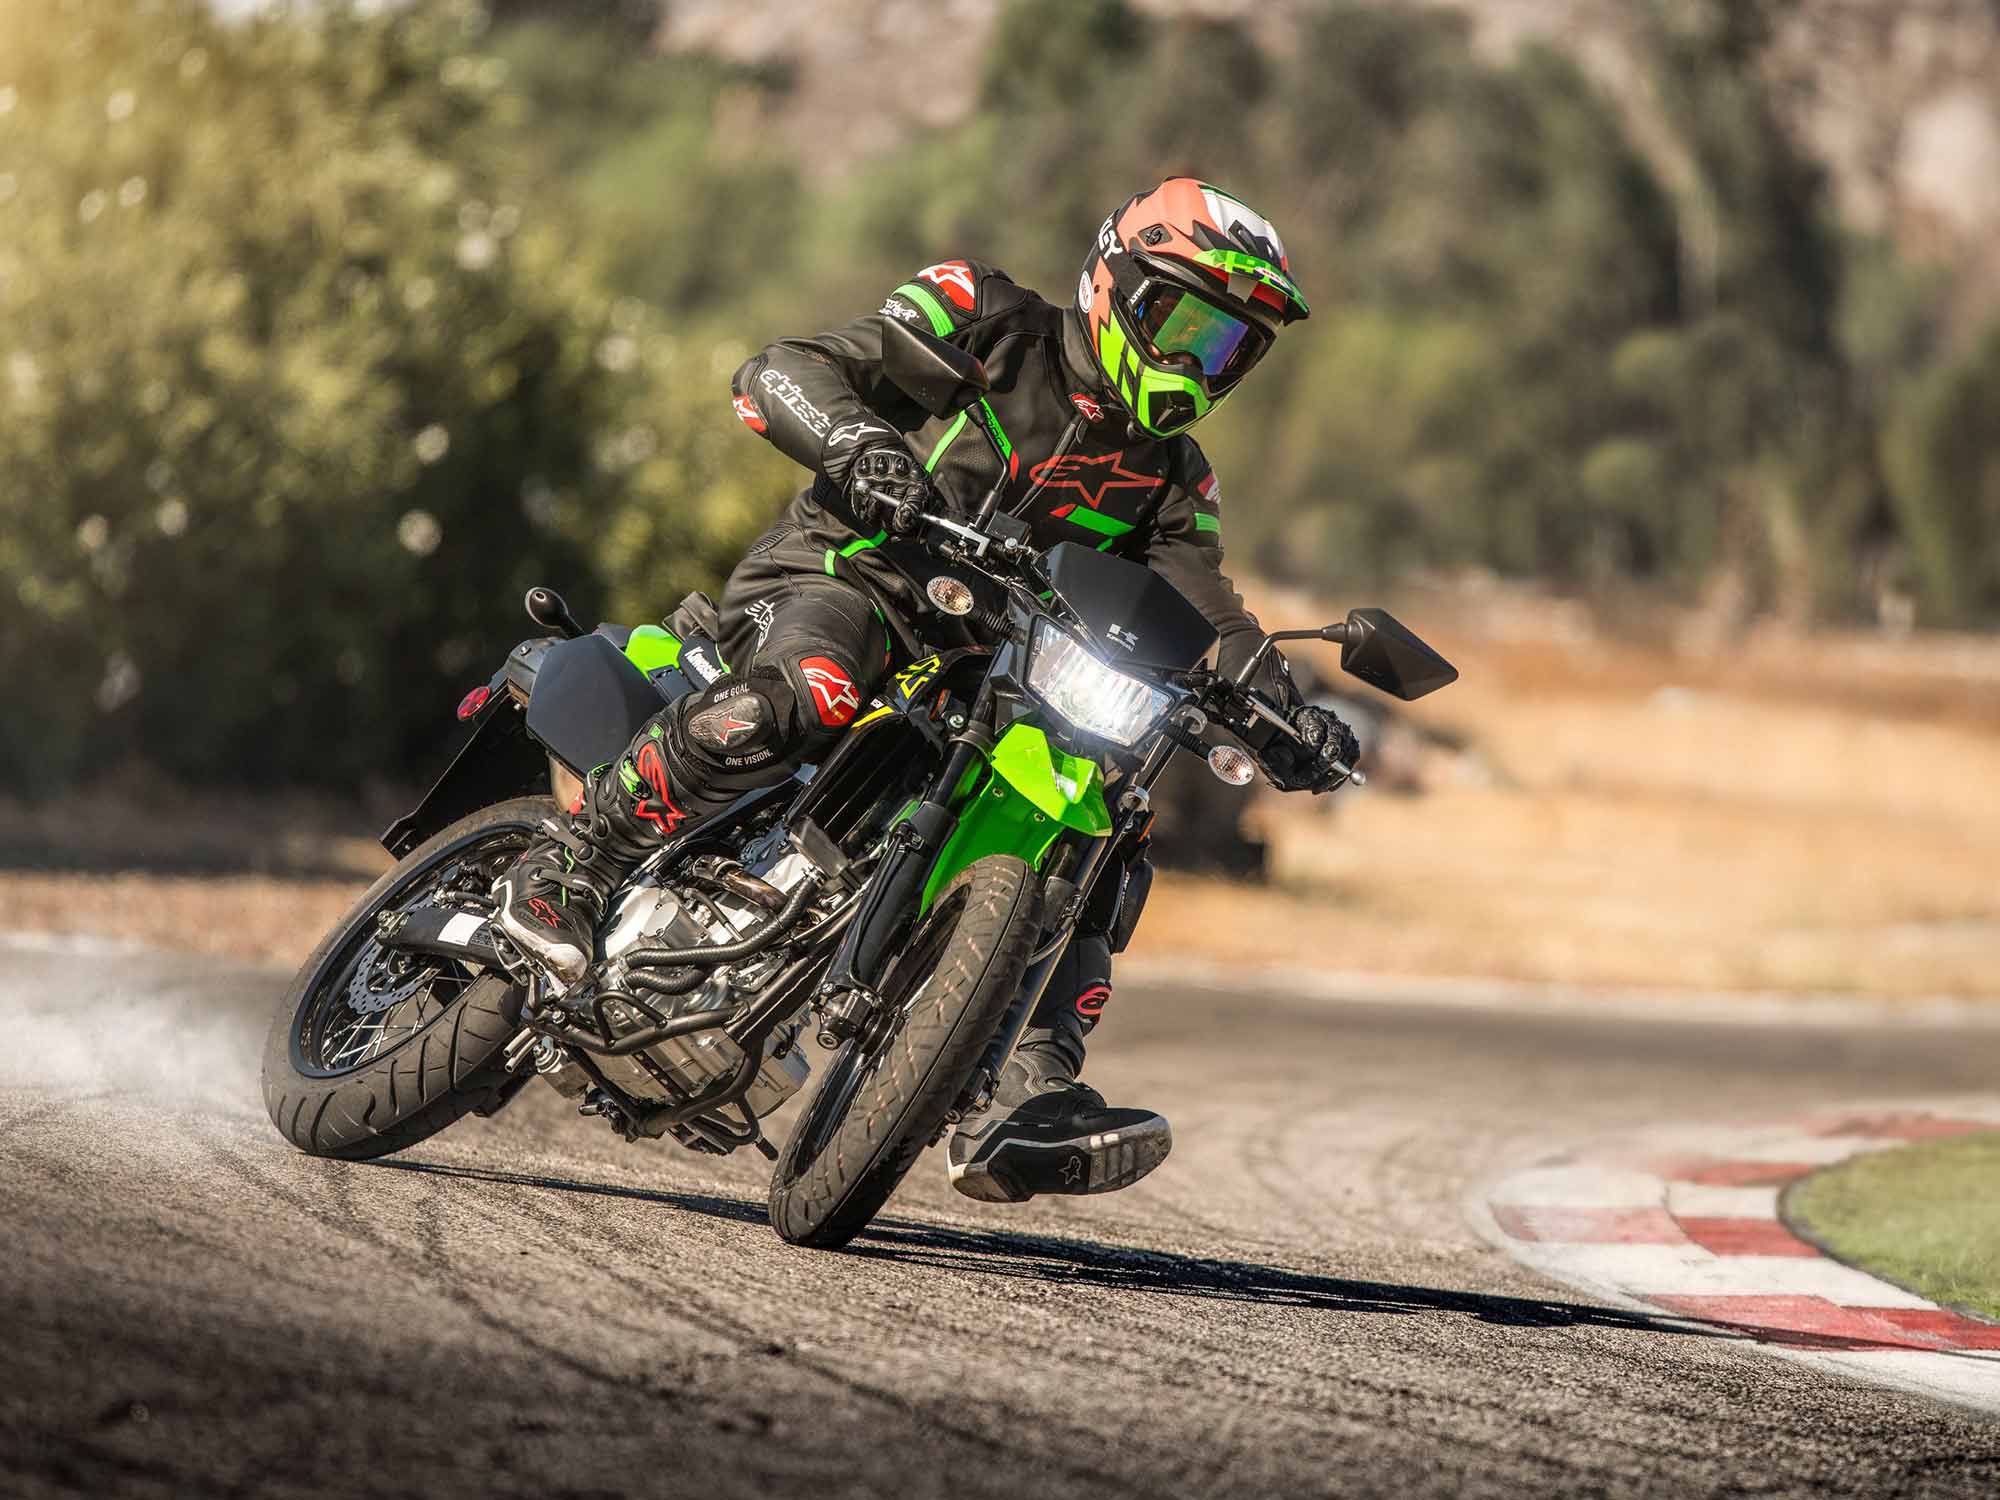 fedt nok Allergi importere 2021 Kawasaki KLX300 and KLX300SM First Look | Cycle World